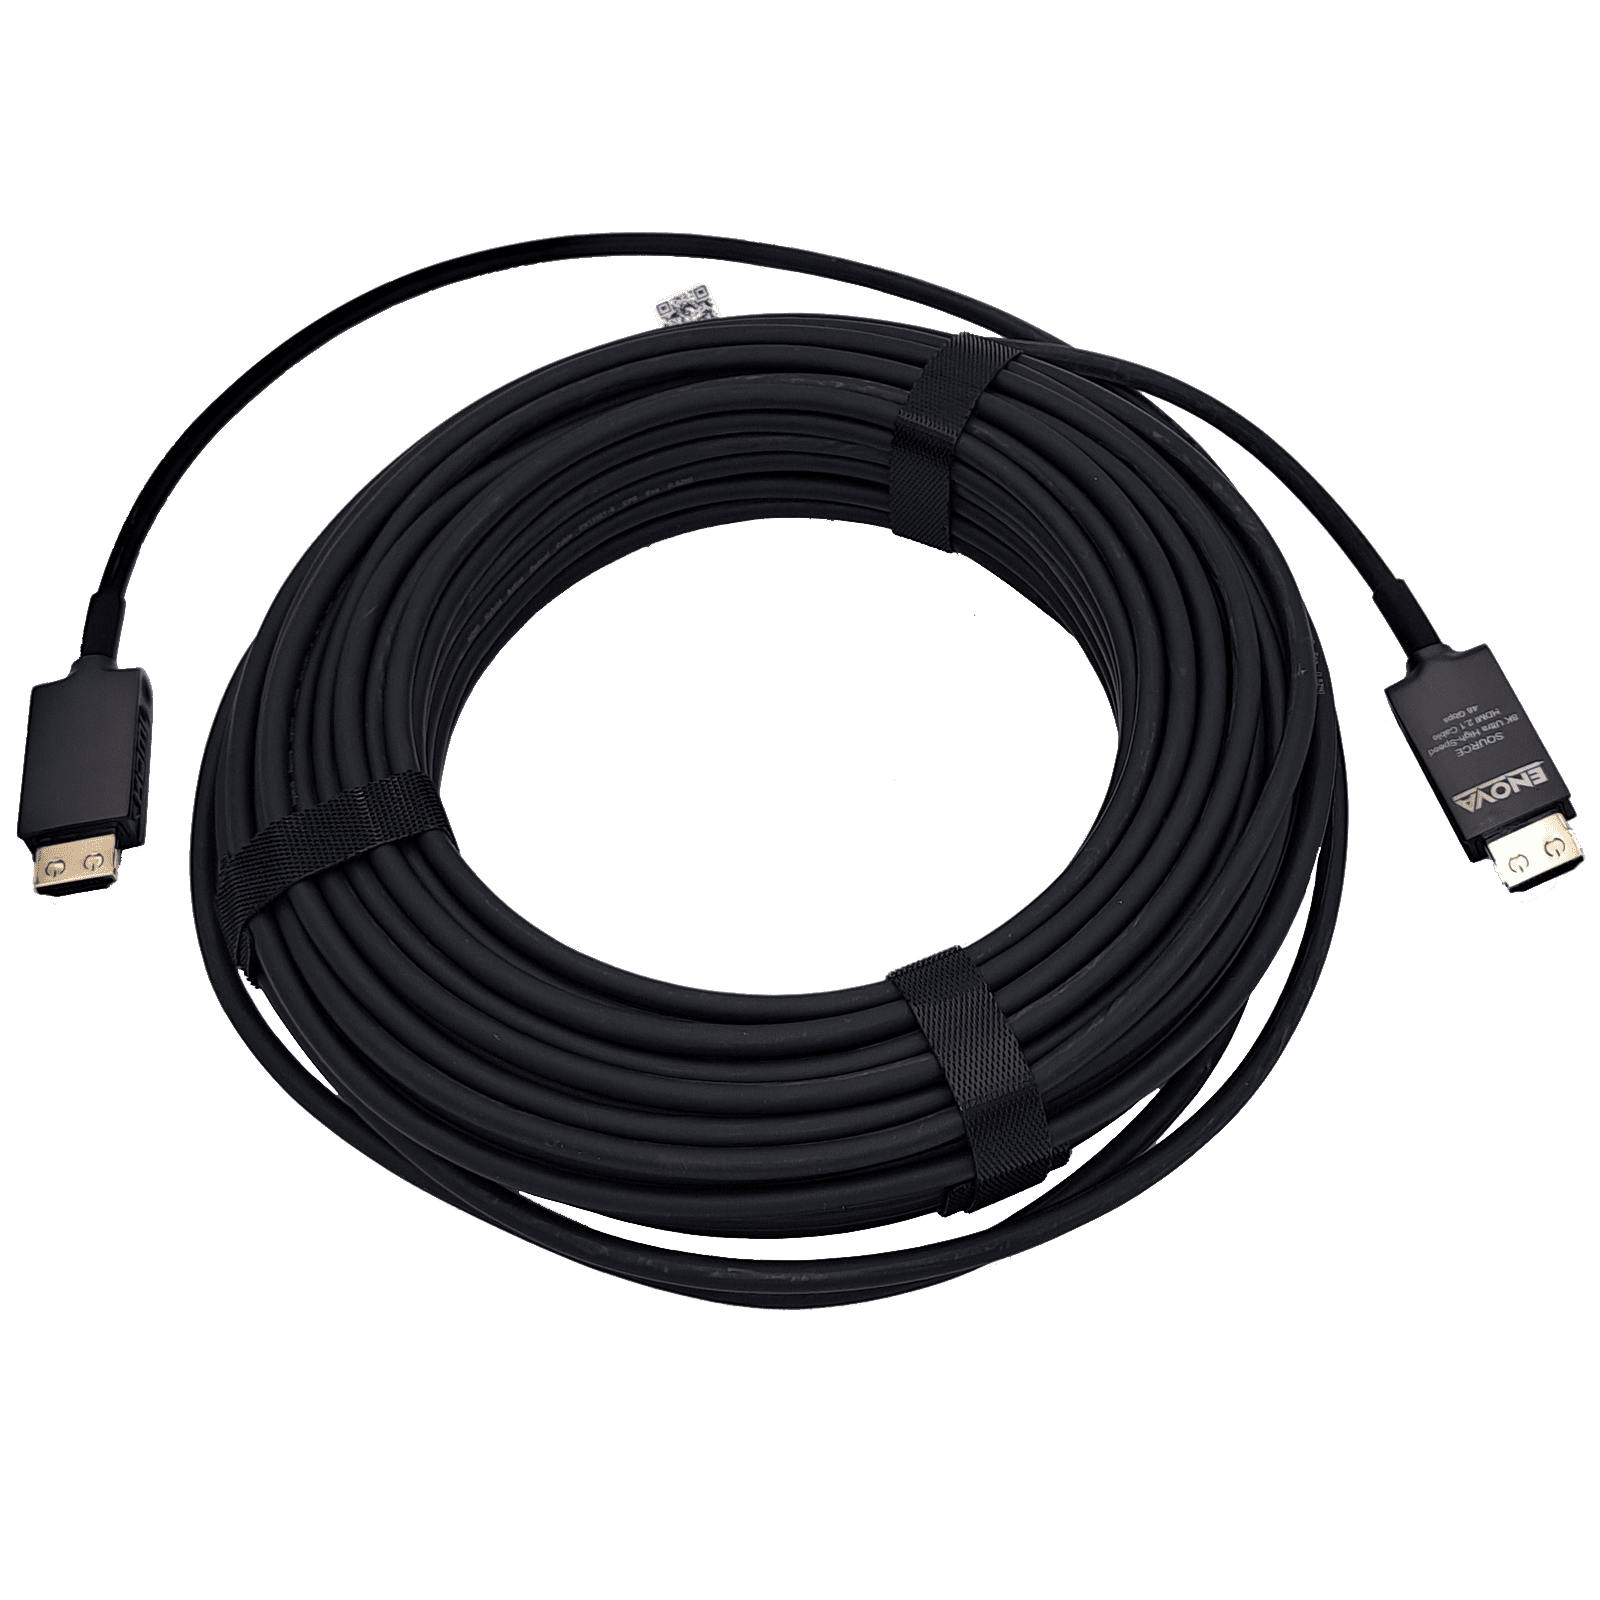 20m Long HDMI Cable Active High Speed with Ethernet 4k UHD